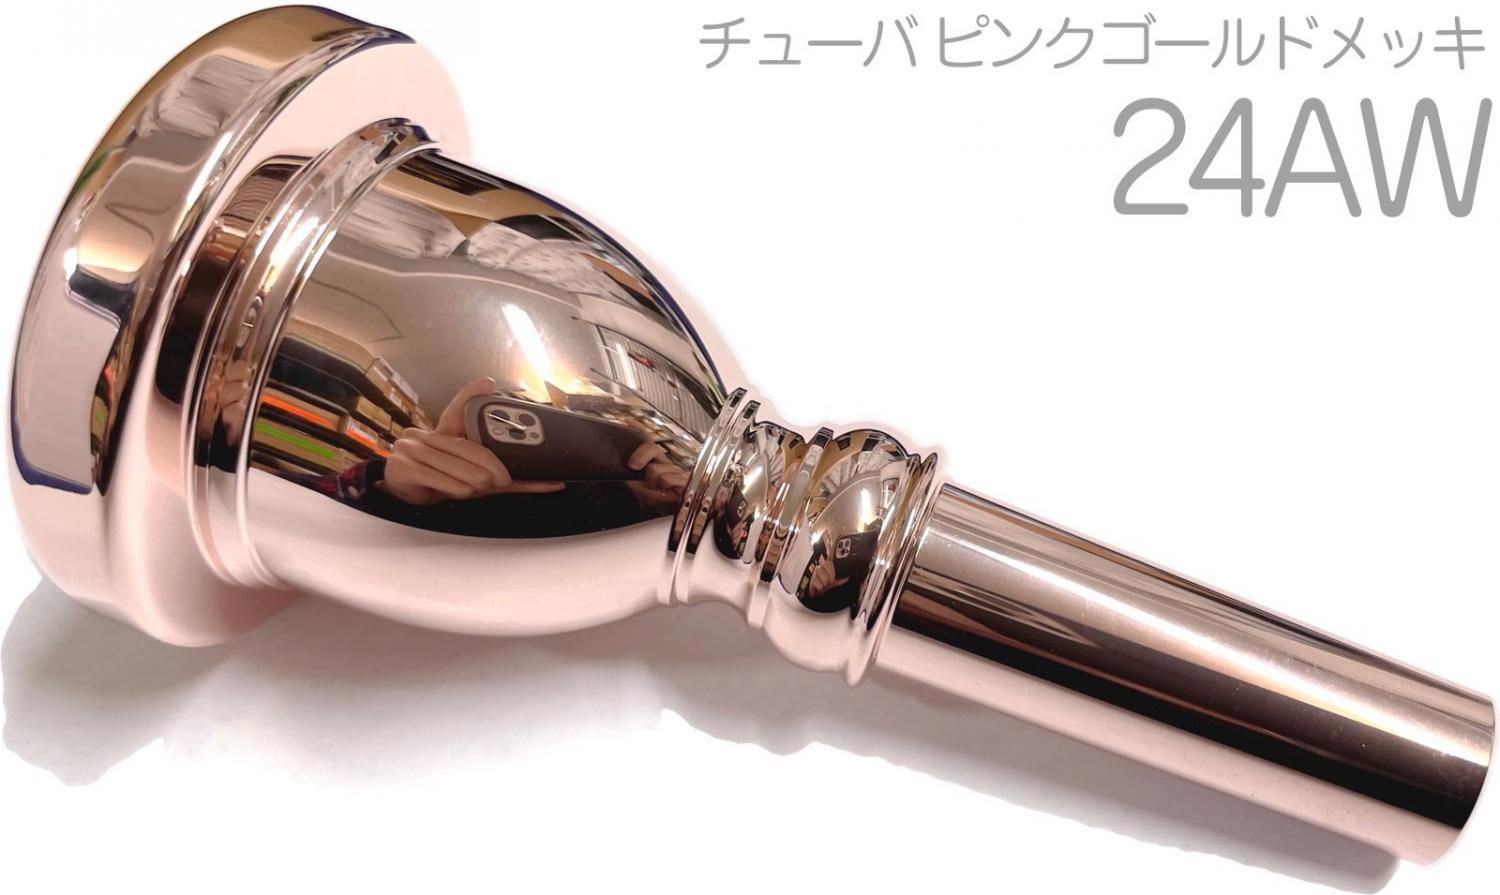 Vincent Bach ( ヴィンセント バック ) 24AW チューバ PGP マウスピース ピンクゴールド 金管 tuba mouthpiece  pink gold plated 北海道 沖縄 離島不可 送料無料! | ワタナベ楽器店 ONLINE SHOP